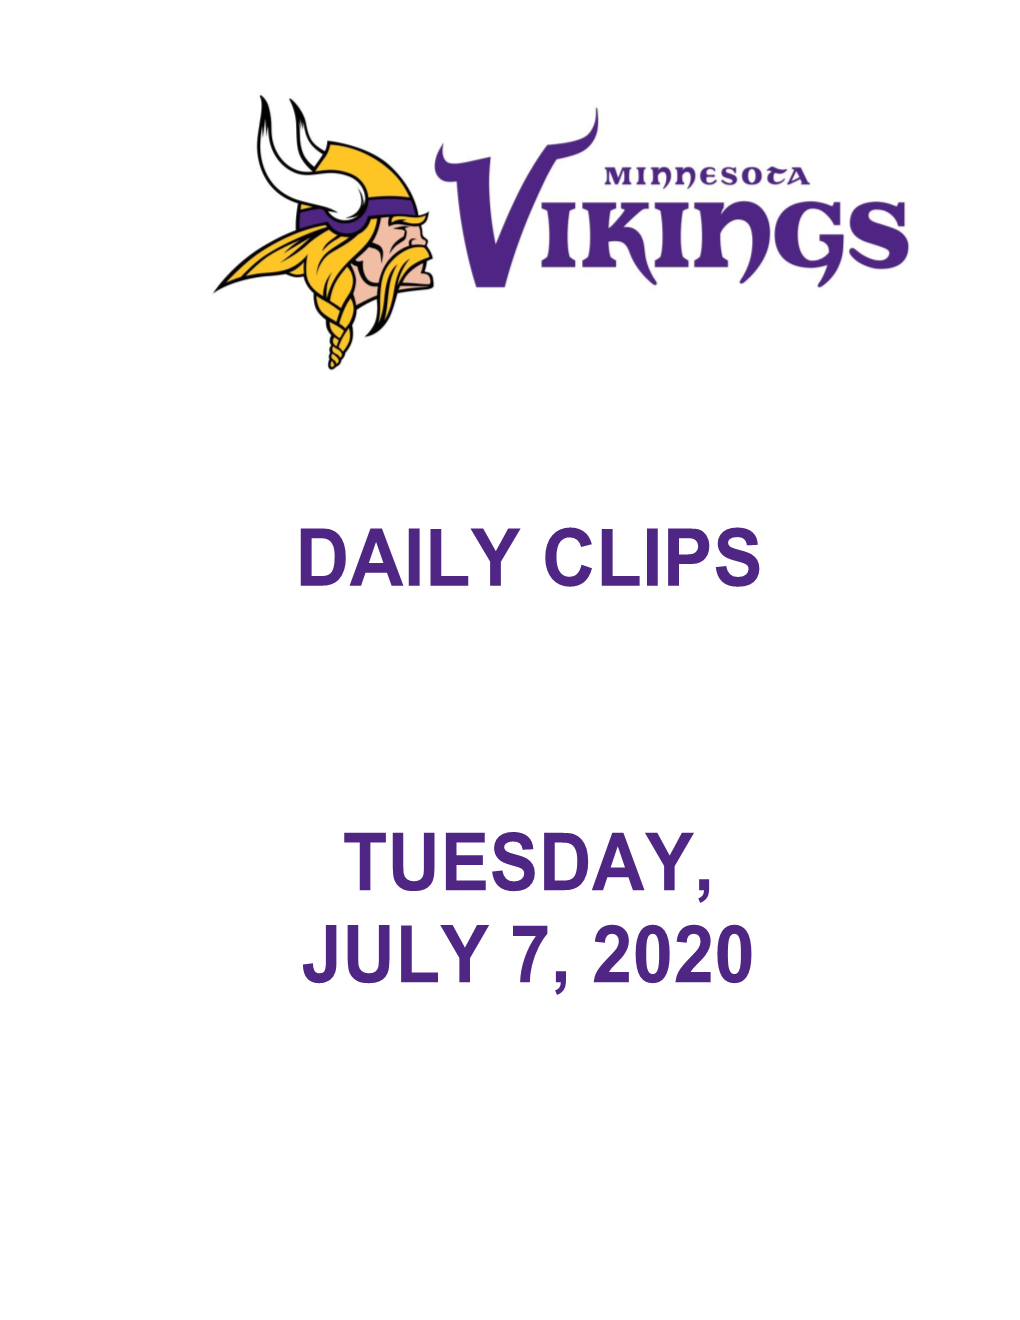 Daily Clips Tuesday, July 7, 2020